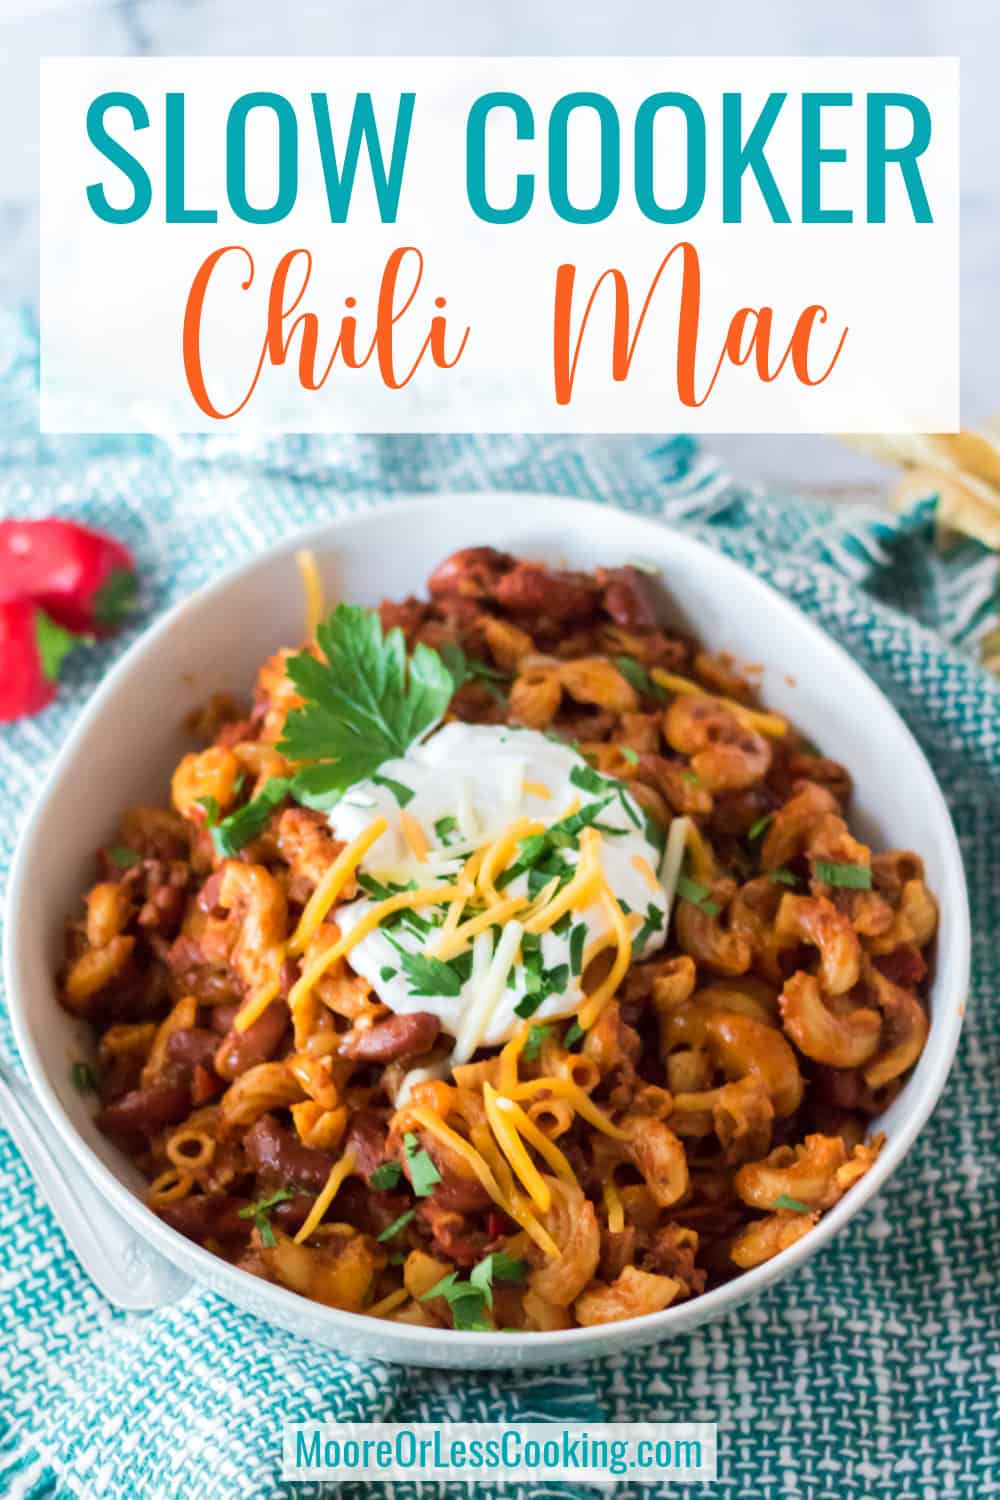 This pantry staple chili mac is pure comfort food that's easily made in your slow cooker. Browned beef joins with kidney beans, tomato sauce, seasonings, and macaroni to create a family favorite meal that's perfect for busy days. via @Mooreorlesscook